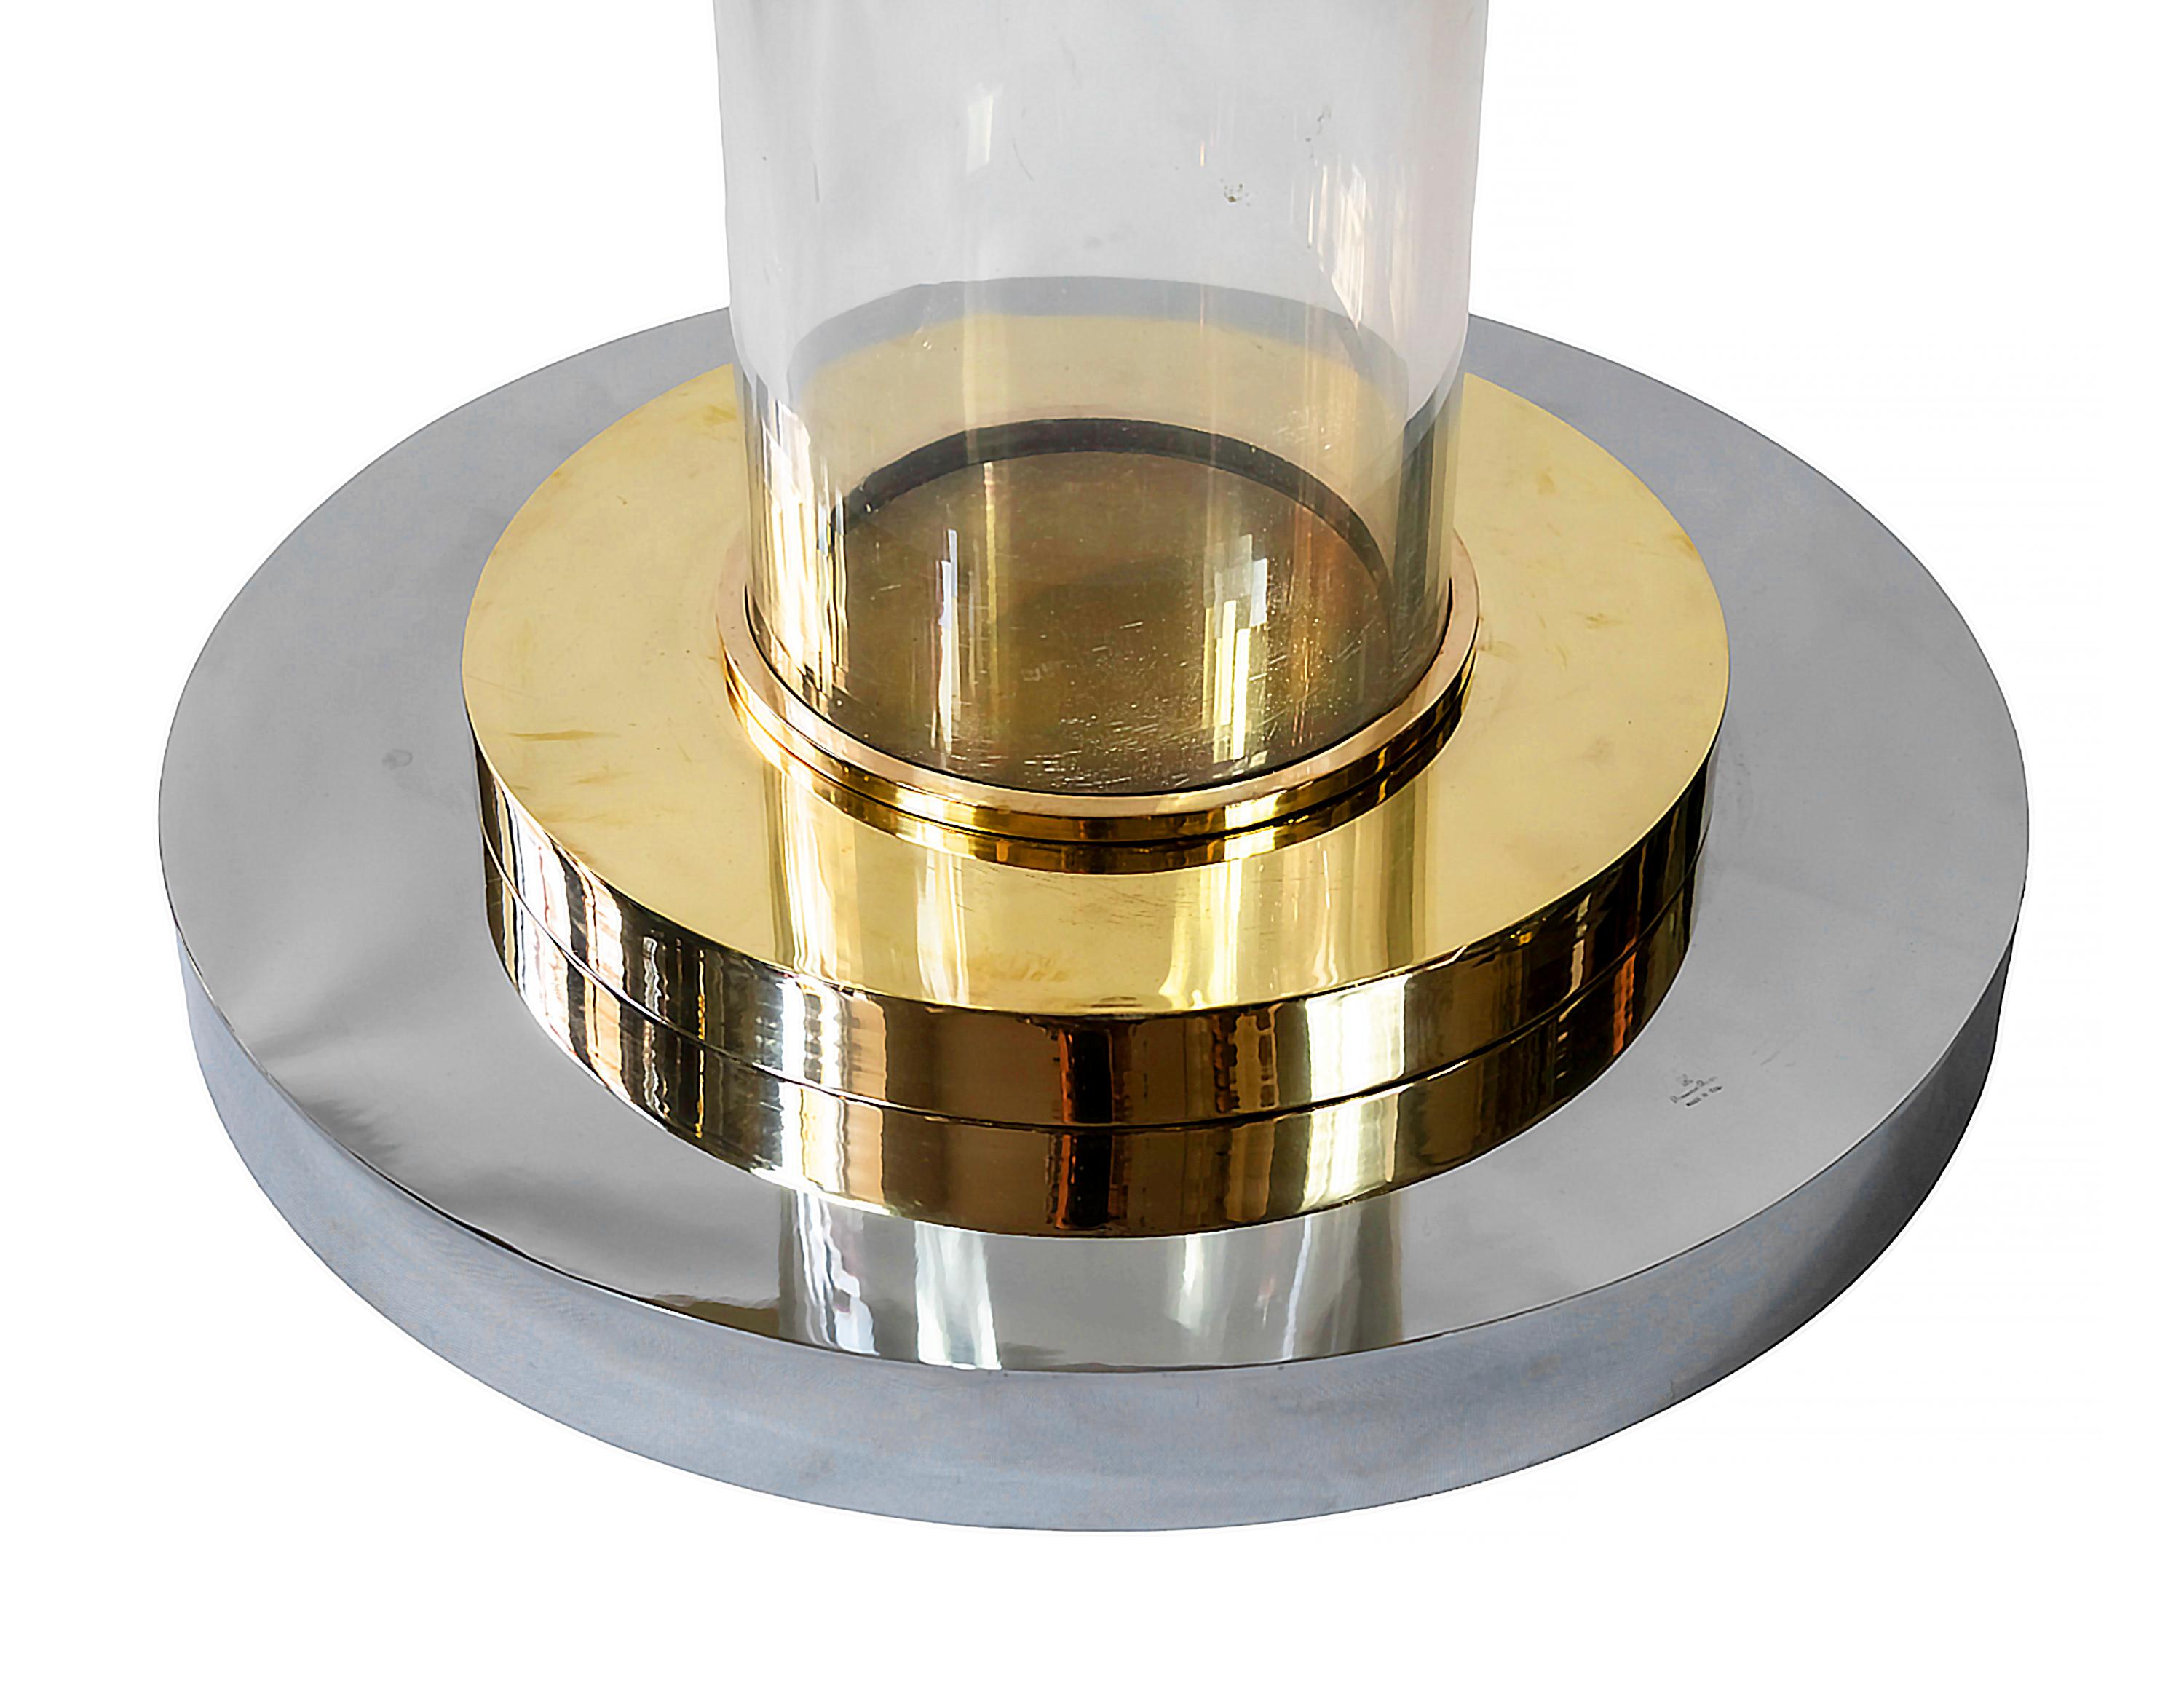 Mid-Century Modern Italian Brass, Chrome and Lucite Table Base Signed Romeo Rega, from, 1970s For Sale